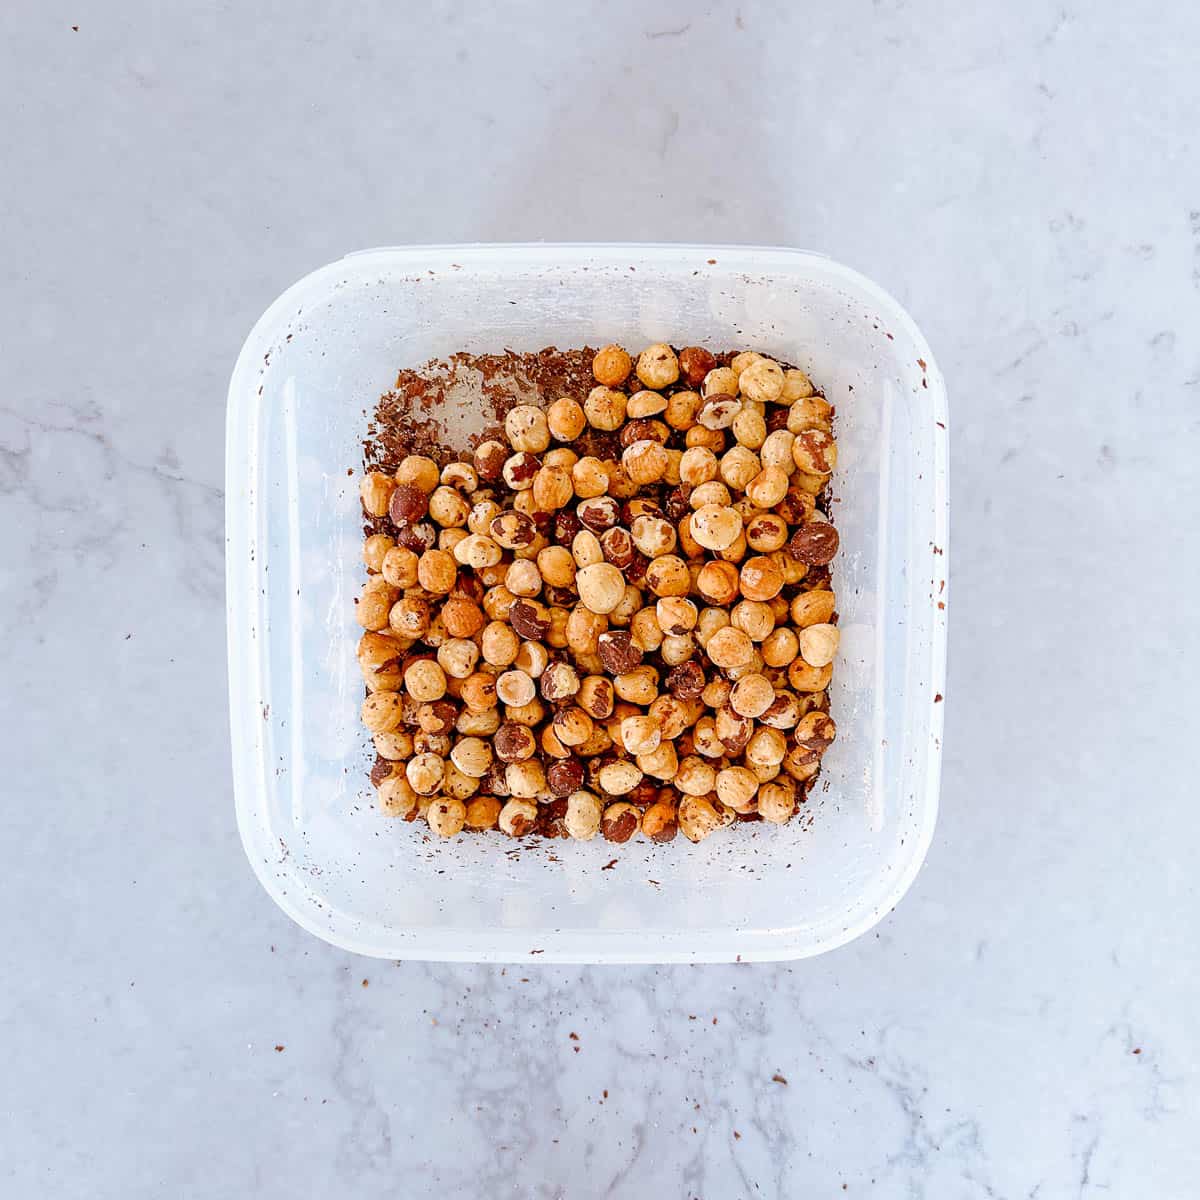 Hazelnuts in a container with their skins off.